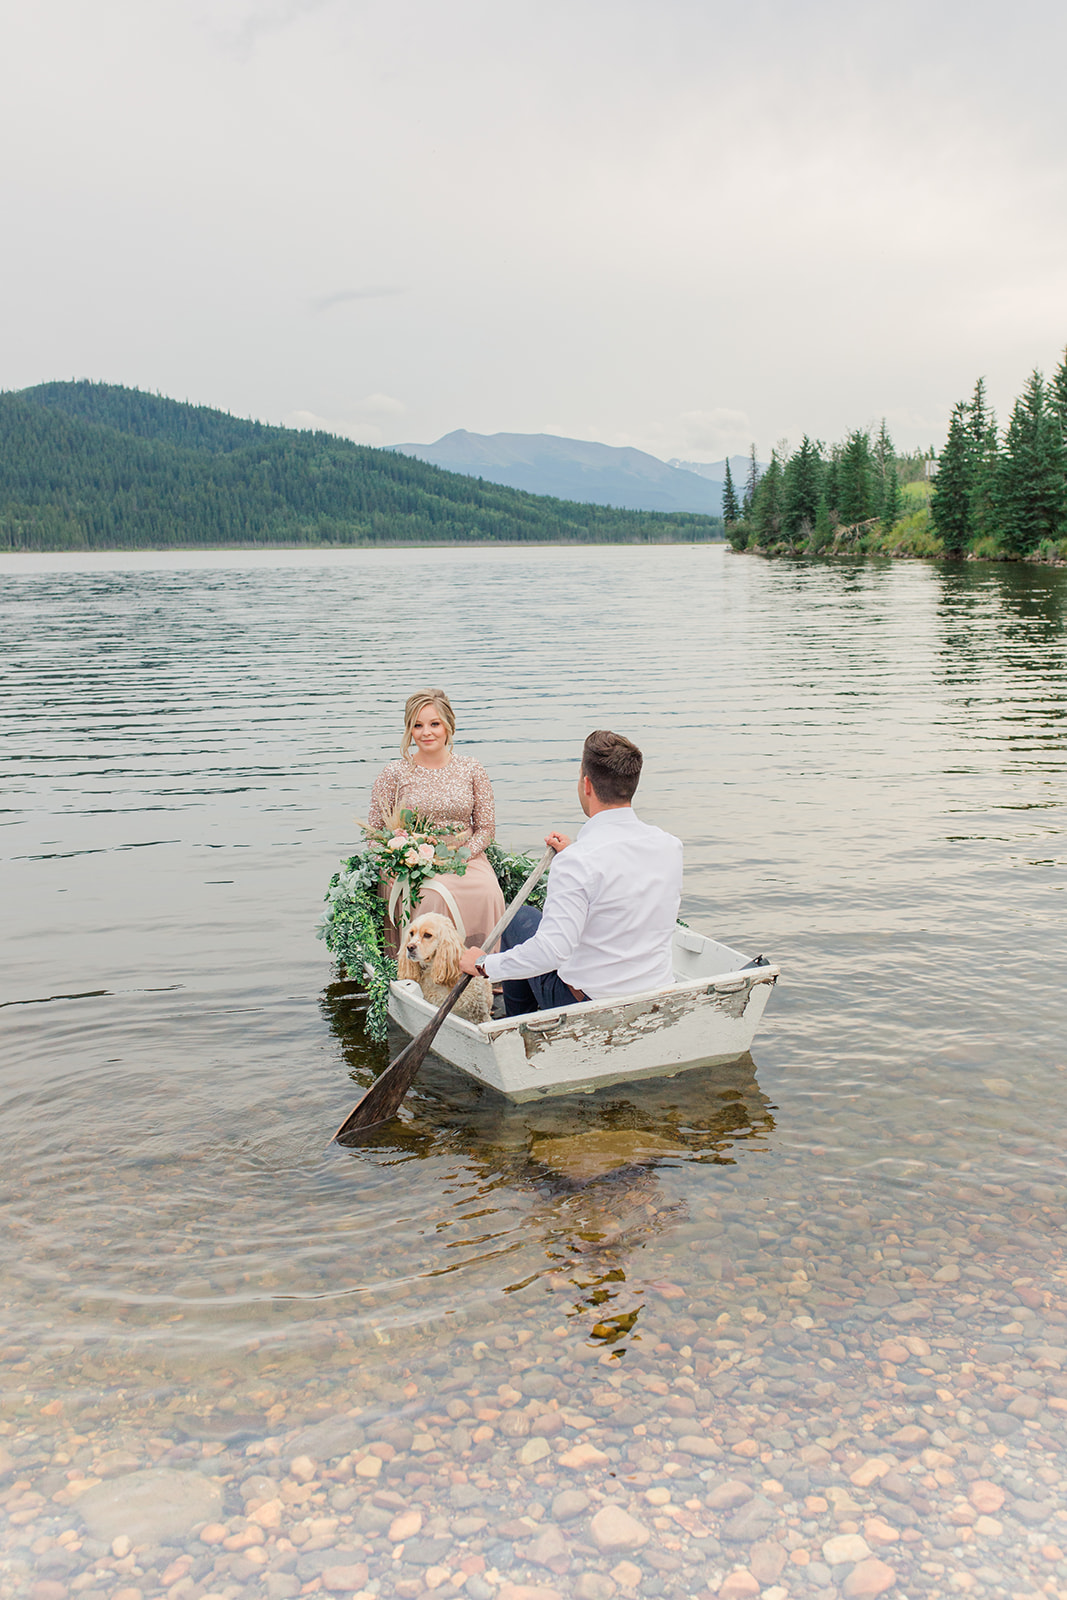 Rowboat elopement inspiration for those eloping lakeside with mountain views